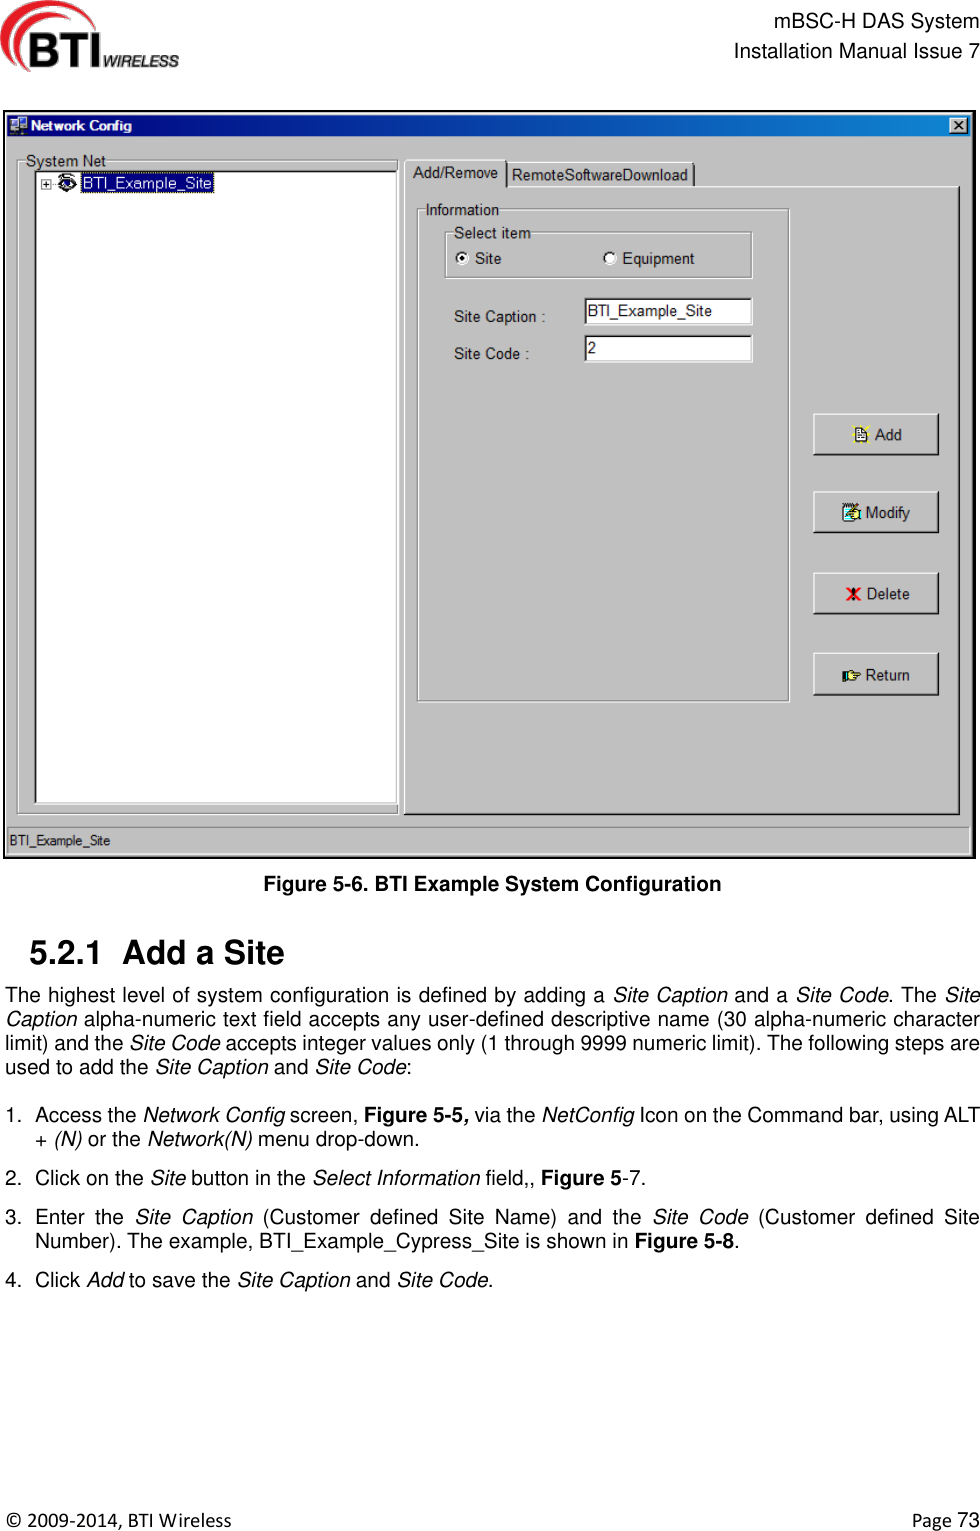                                                   mBSC-H DAS System   Installation Manual Issue 7  ©  2009-2014, BTI Wireless    Page 73  Figure 5-6. BTI Example System Configuration   5.2.1  Add a Site The highest level of system configuration is defined by adding a Site Caption and a Site Code. The Site Caption alpha-numeric text field accepts any user-defined descriptive name (30 alpha-numeric character limit) and the Site Code accepts integer values only (1 through 9999 numeric limit). The following steps are used to add the Site Caption and Site Code:  1.  Access the Network Config screen, Figure 5-5, via the NetConfig Icon on the Command bar, using ALT + (N) or the Network(N) menu drop-down. 2.  Click on the Site button in the Select Information field,, Figure 5-7. 3.  Enter  the  Site  Caption  (Customer  defined  Site  Name)  and  the  Site  Code  (Customer  defined  Site Number). The example, BTI_Example_Cypress_Site is shown in Figure 5-8. 4.  Click Add to save the Site Caption and Site Code. 